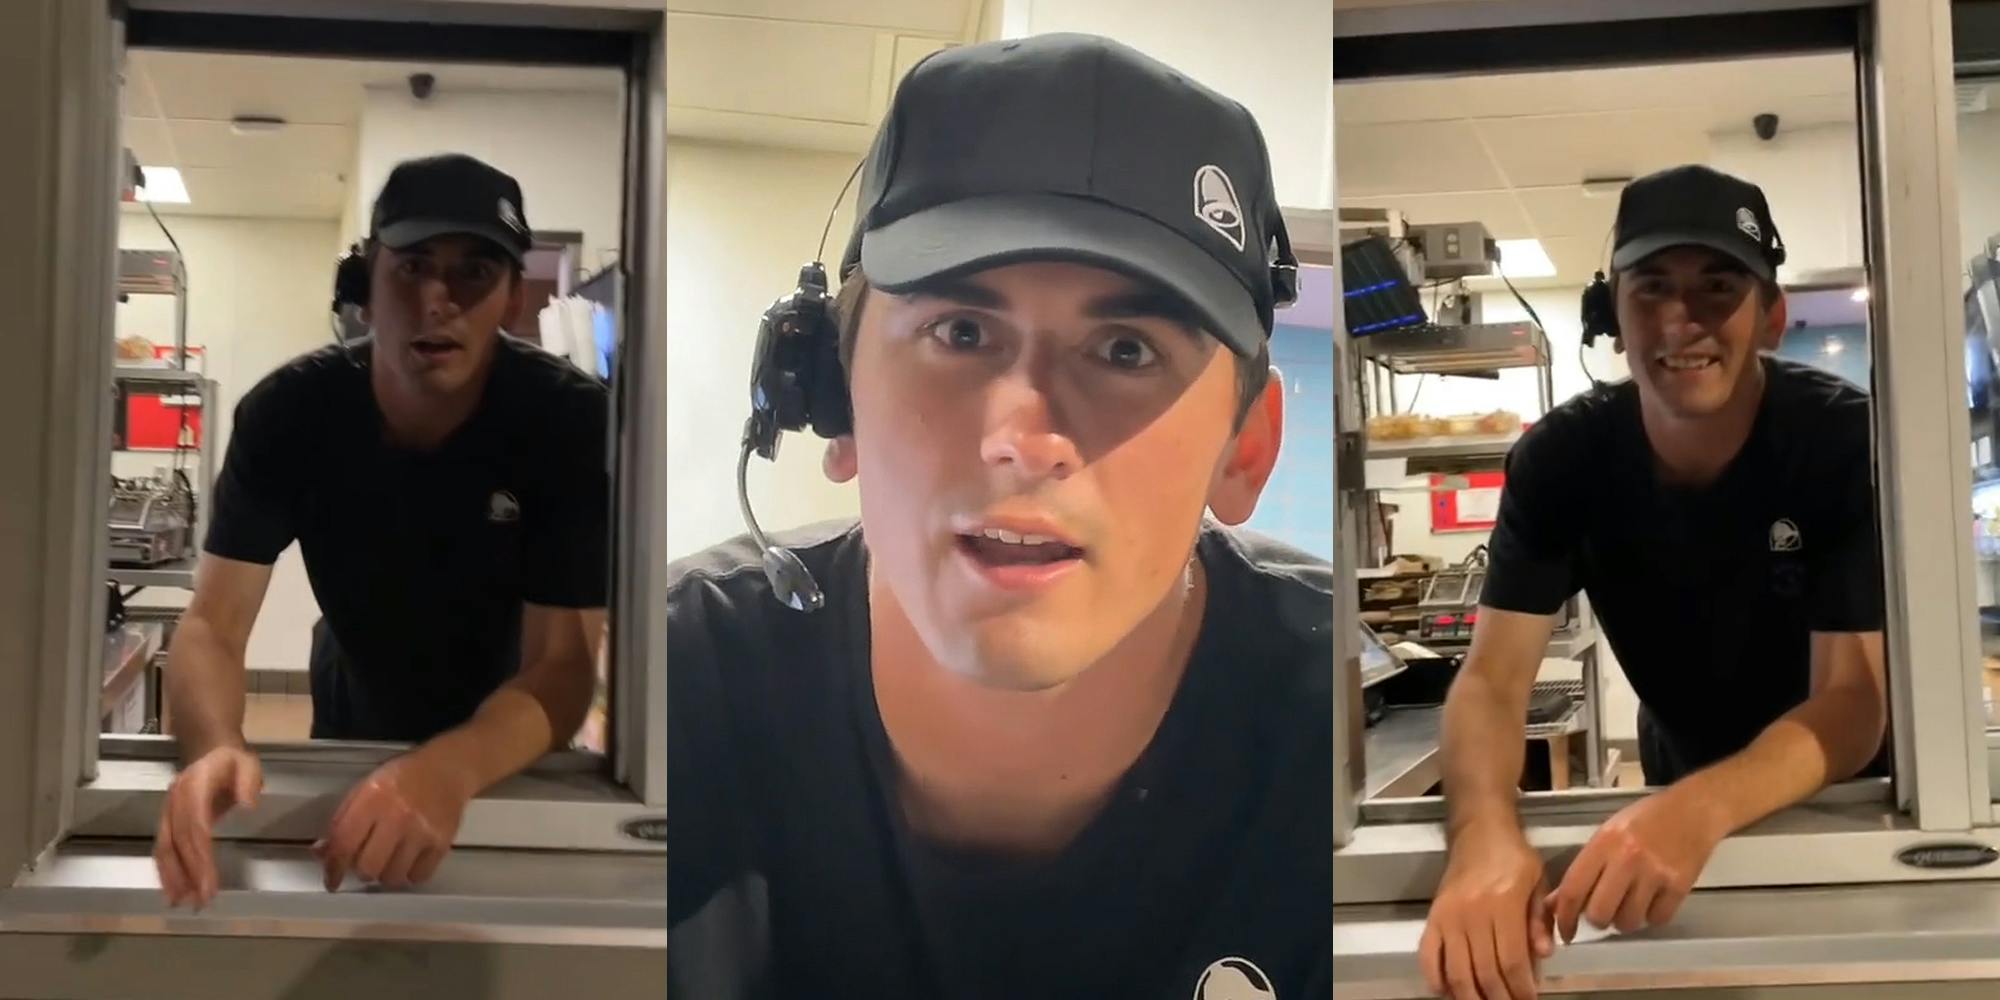 ‘I just feel like I’m better than everyone else’: Taco Bell drive-thru worker says he ‘doesn’t give a sh*t’ about orders, vents to customer about struggles